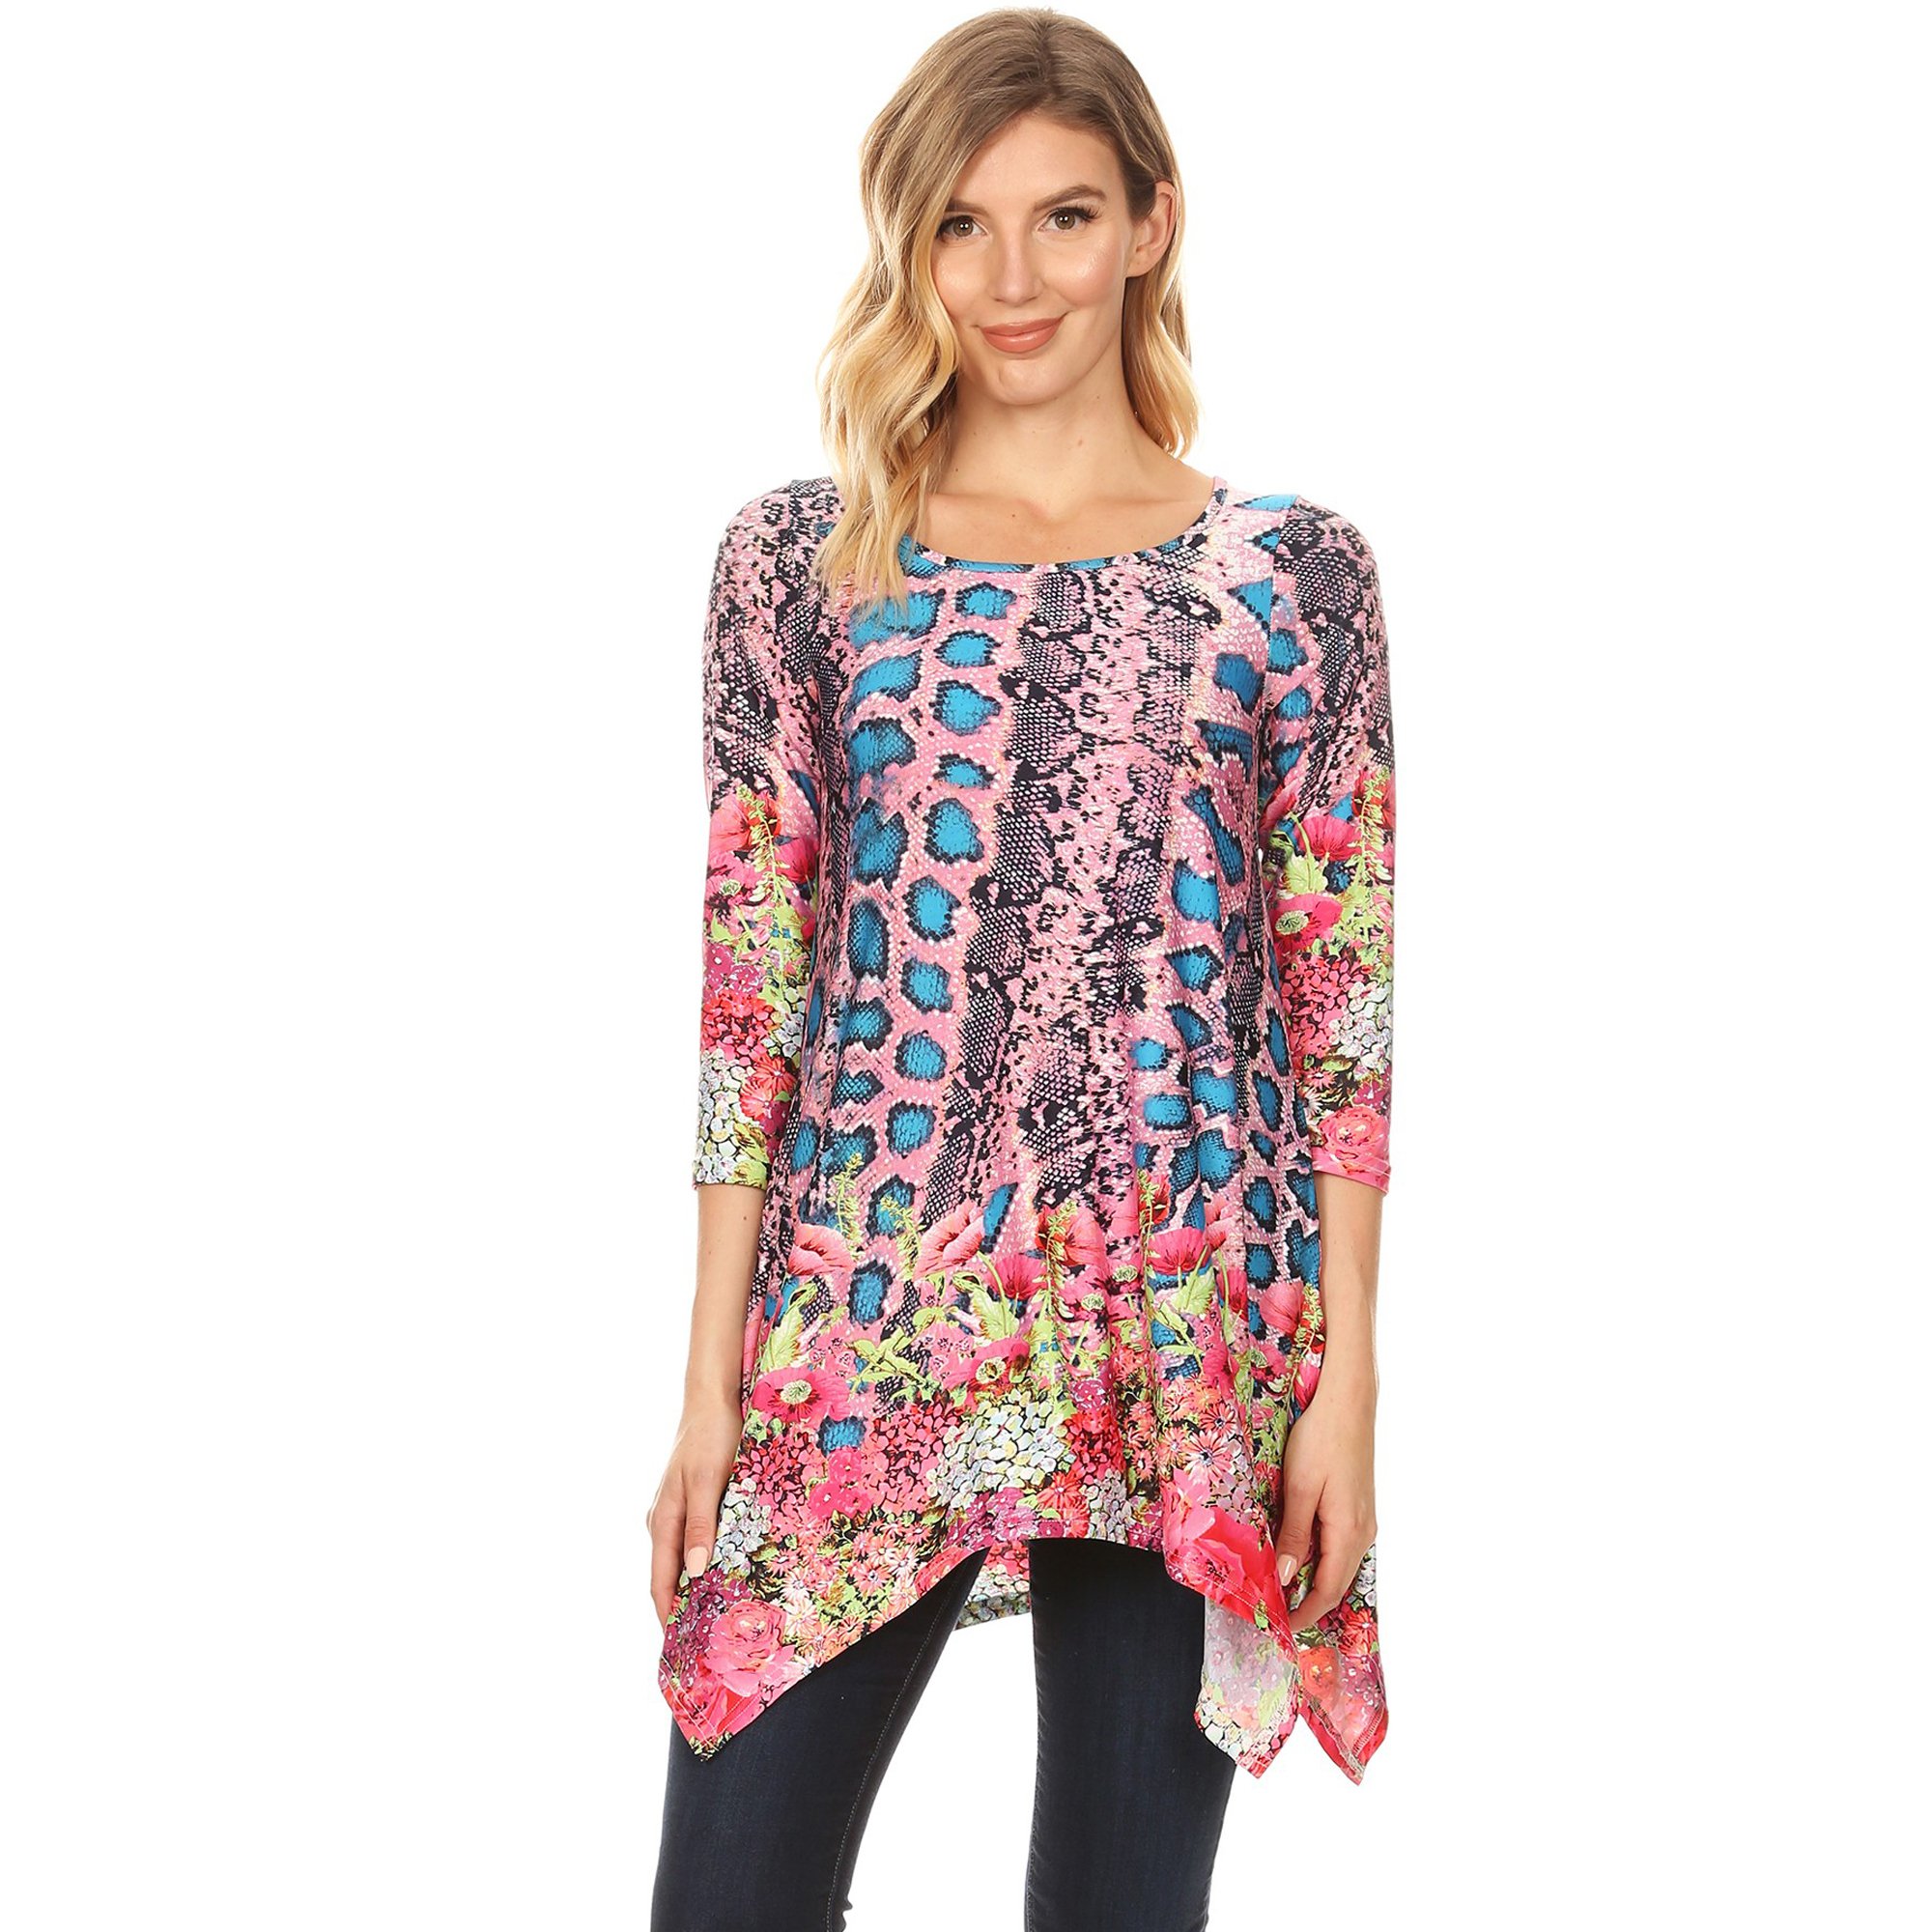 White Mark Women's Multi-Color Tunic Top - Teal/Pink, Small